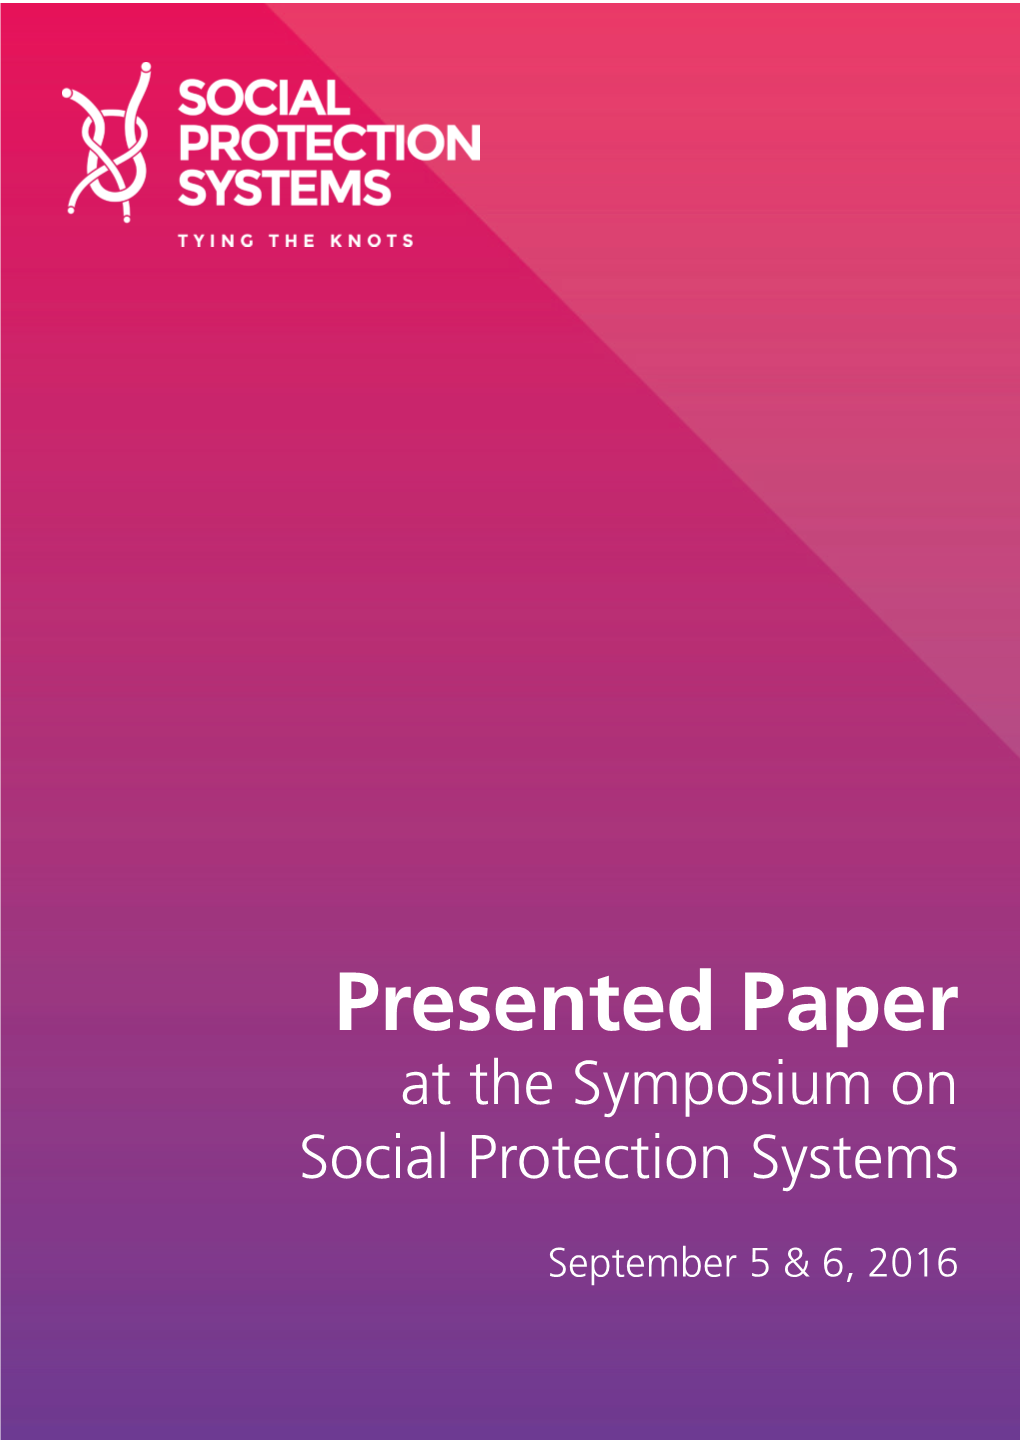 A New Social Protection Model in the CIS Countries: from Social Assistance to Labour Activation